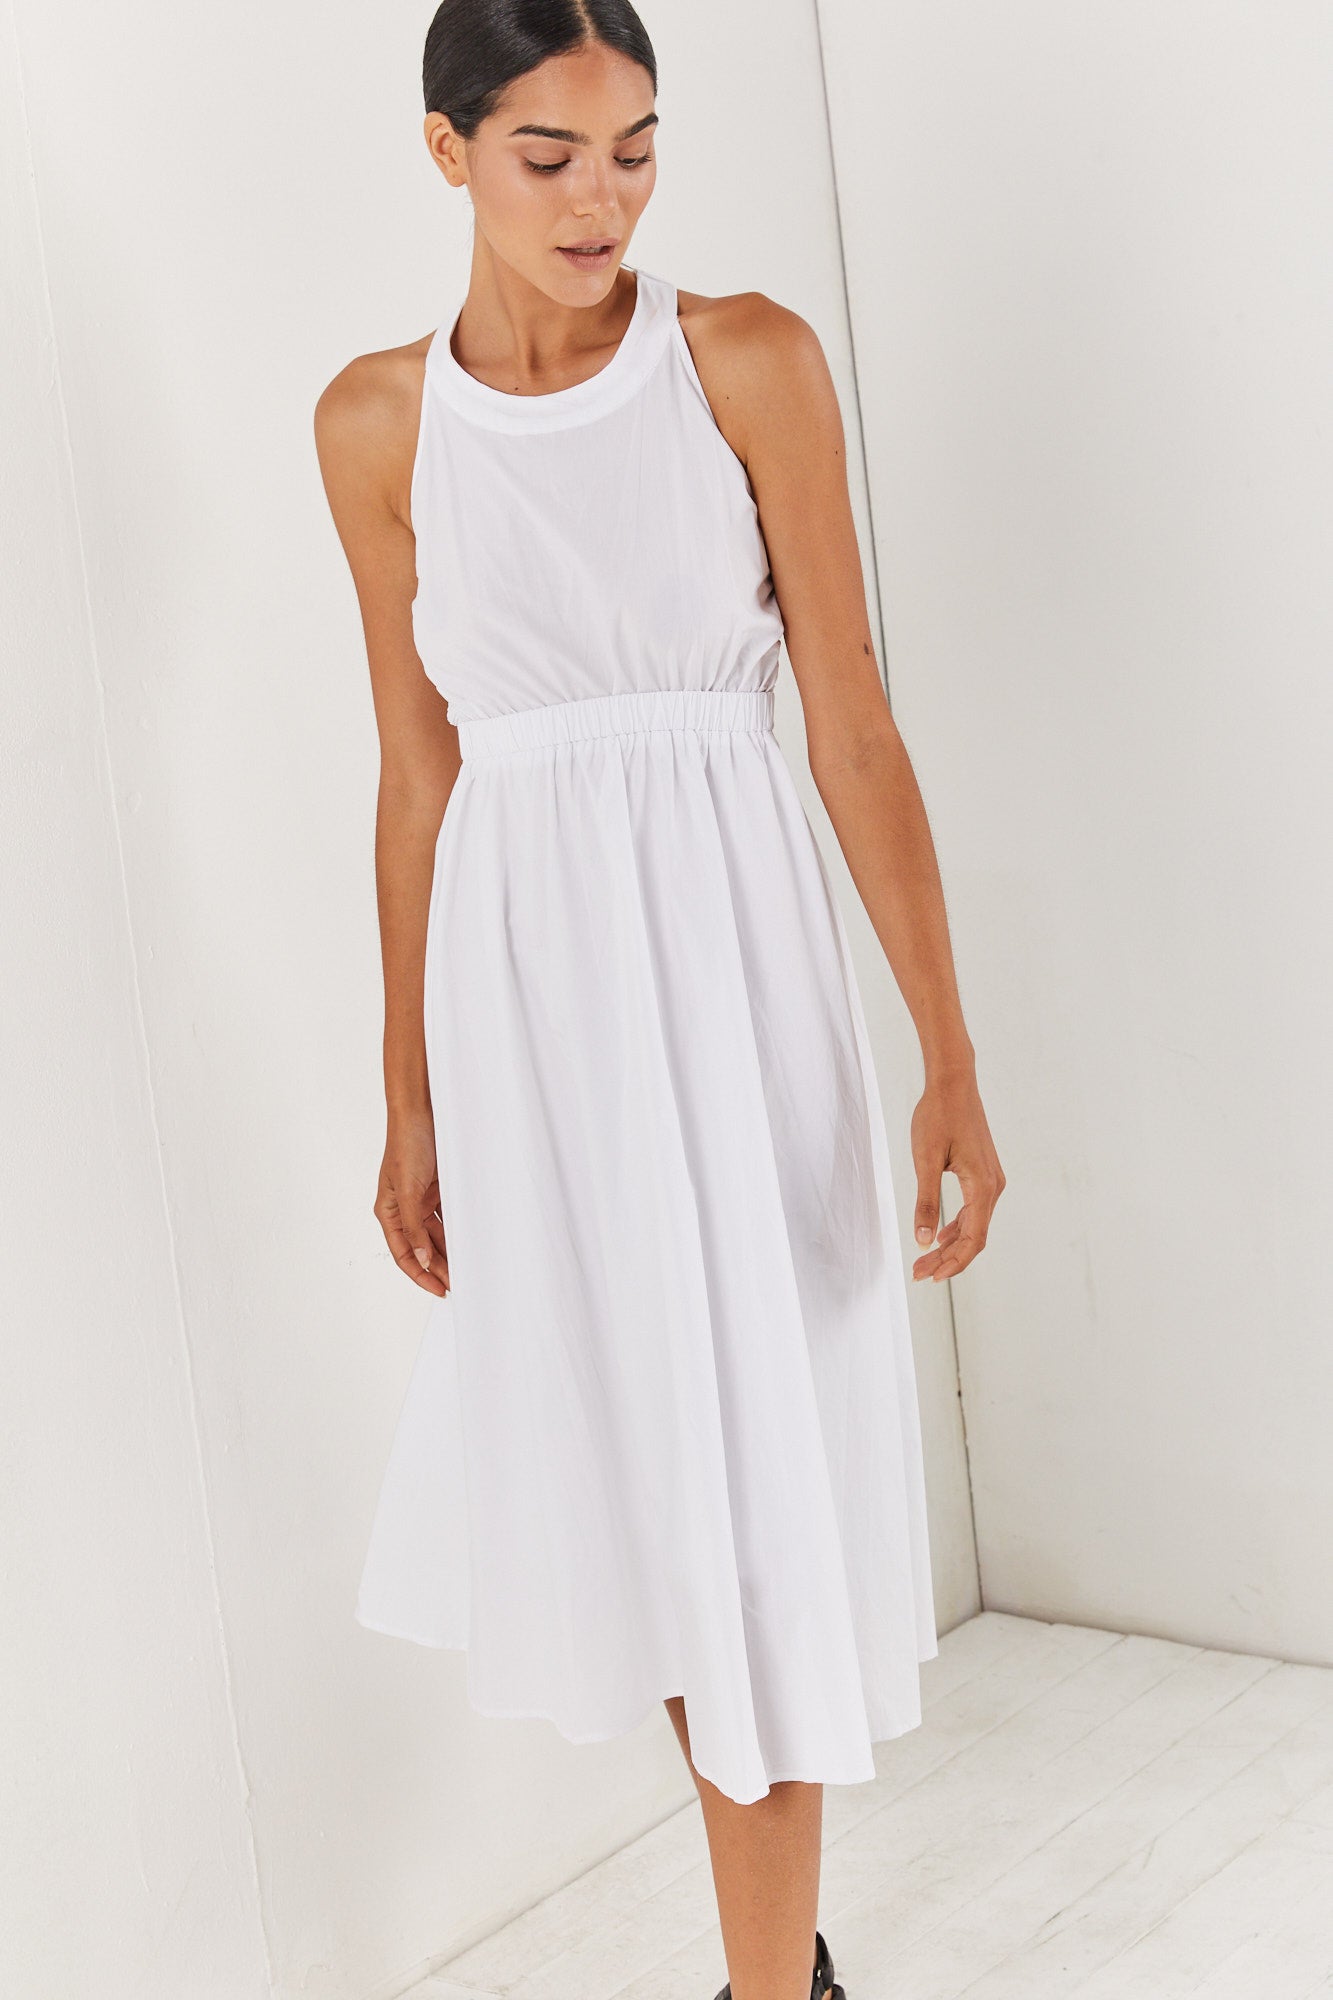 The Ultimate White Dress